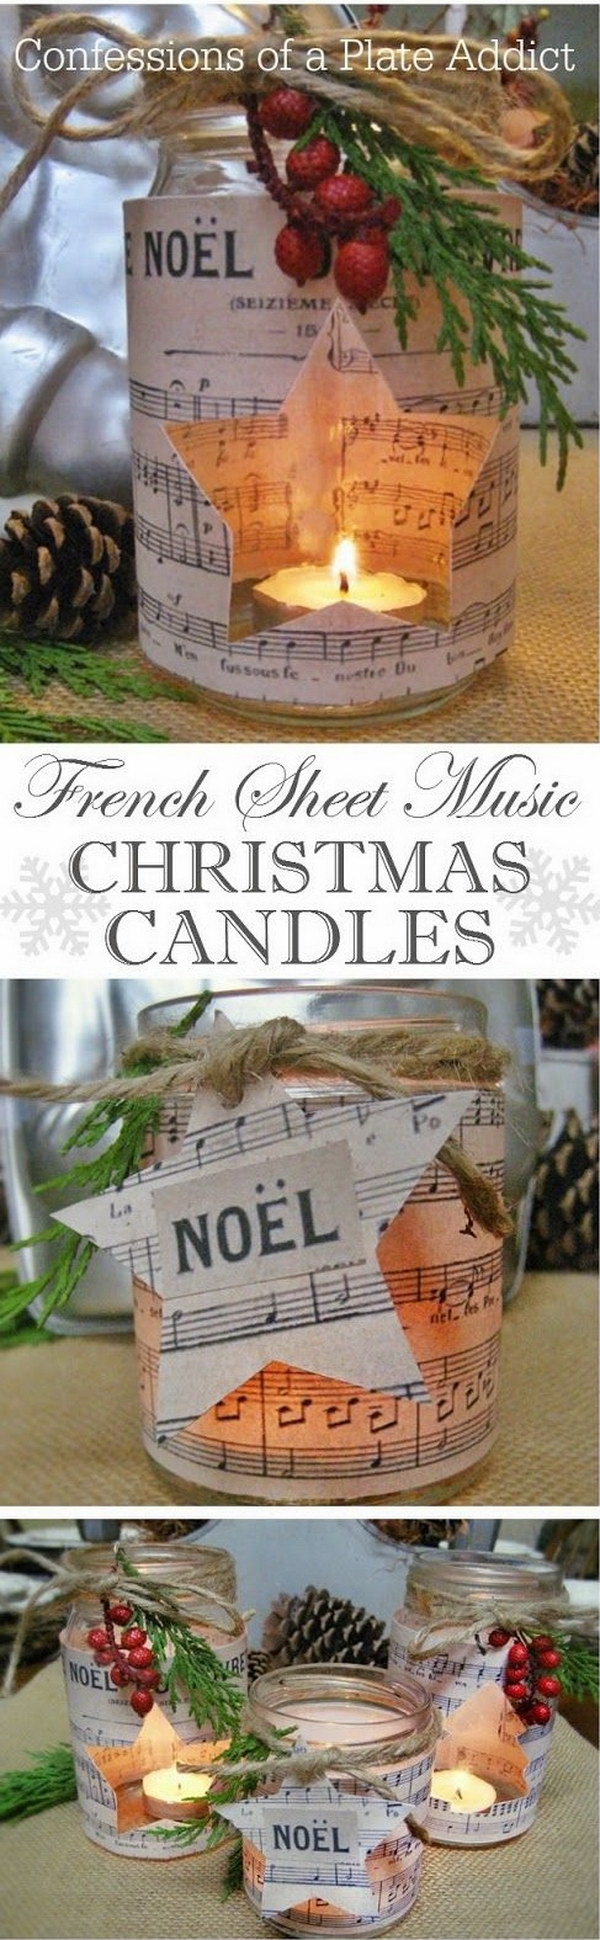 French Sheet Music Christmas Candles. 